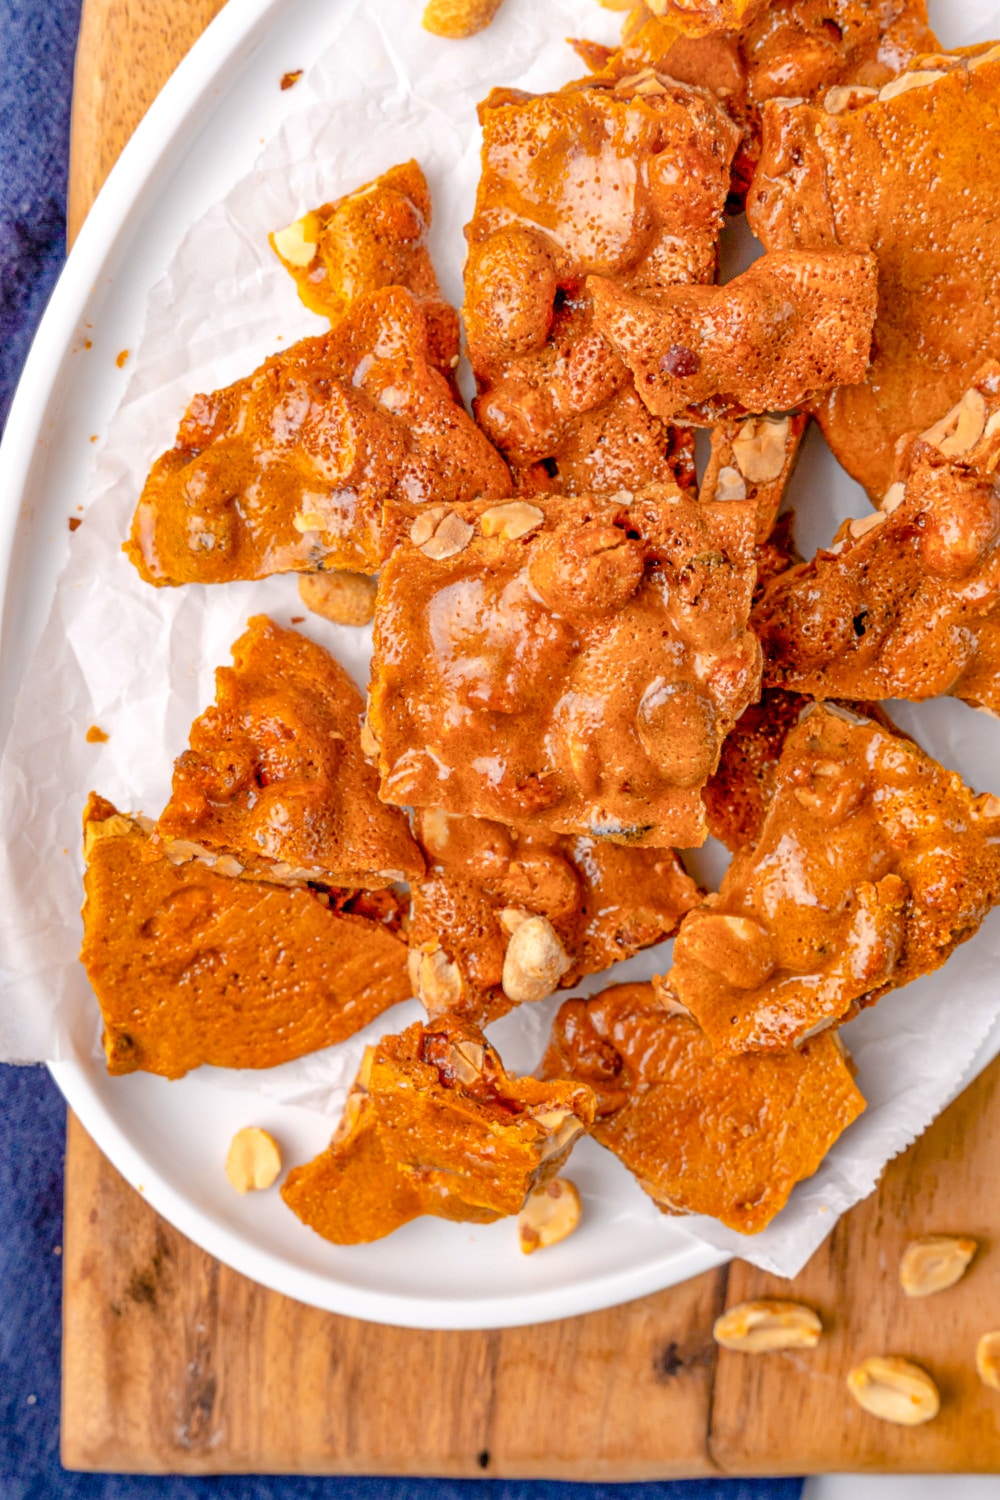 Pieces of Peanut Brittle on white plate.